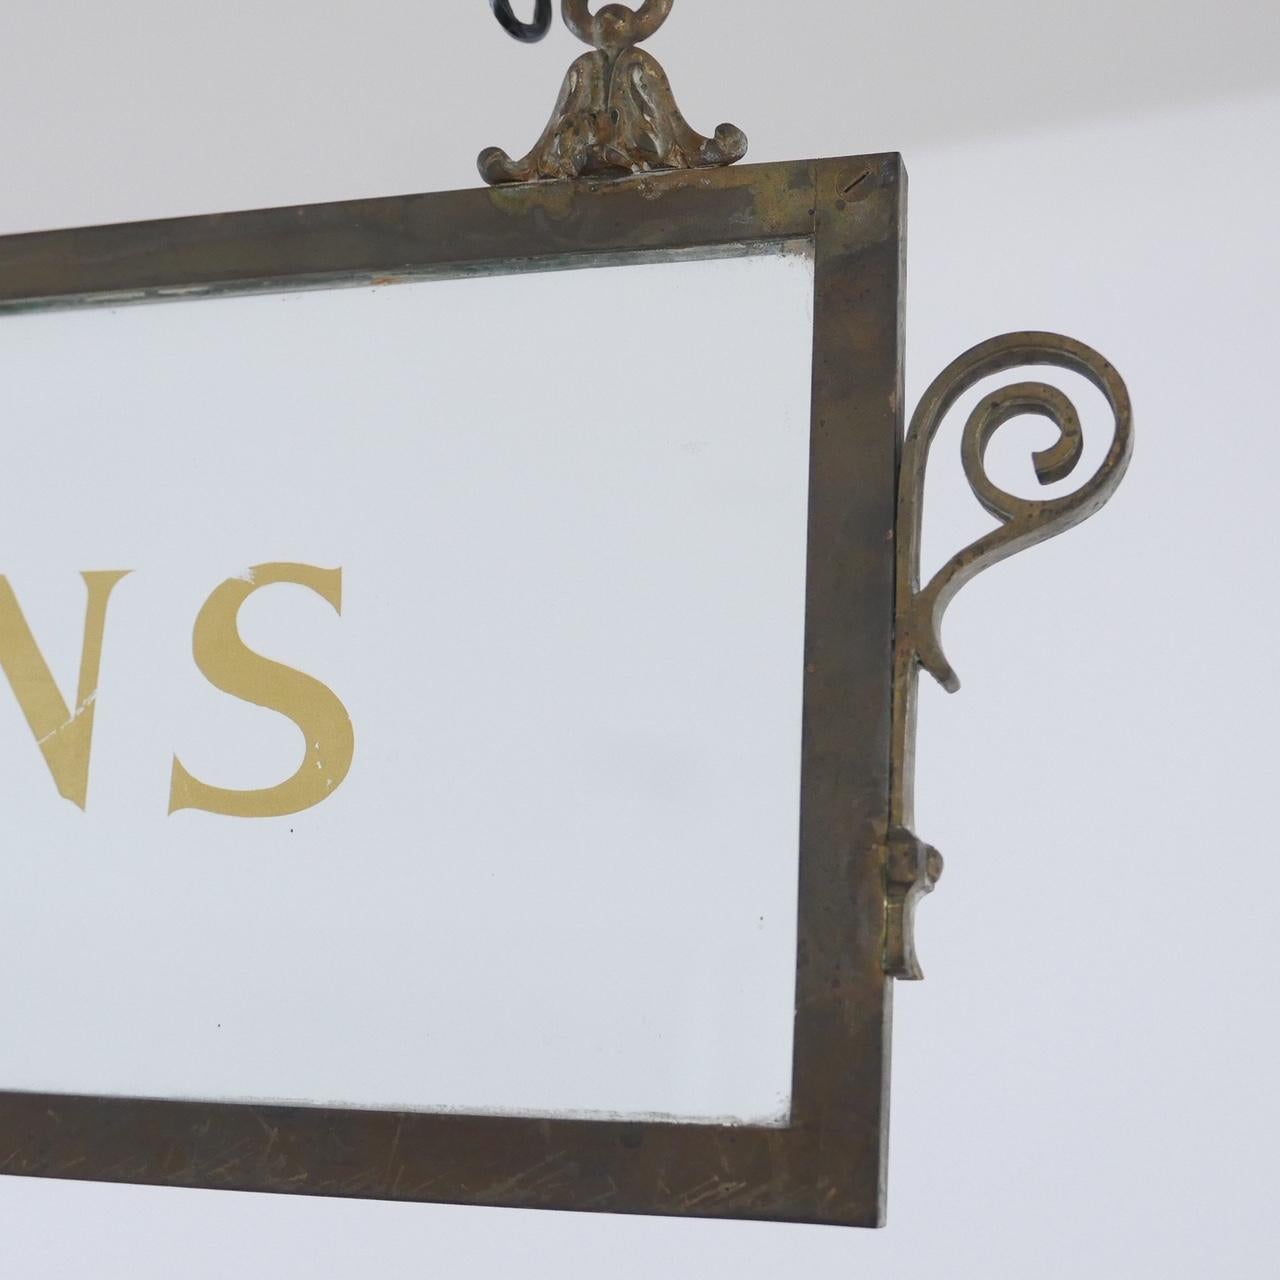 Hanging glass and bronze decorative signs.

Believed to be from a stock exchange or bank perhaps. The original sign writing is retains but could be replaced and have new sign writing done with any text suitable for its new use.

One states